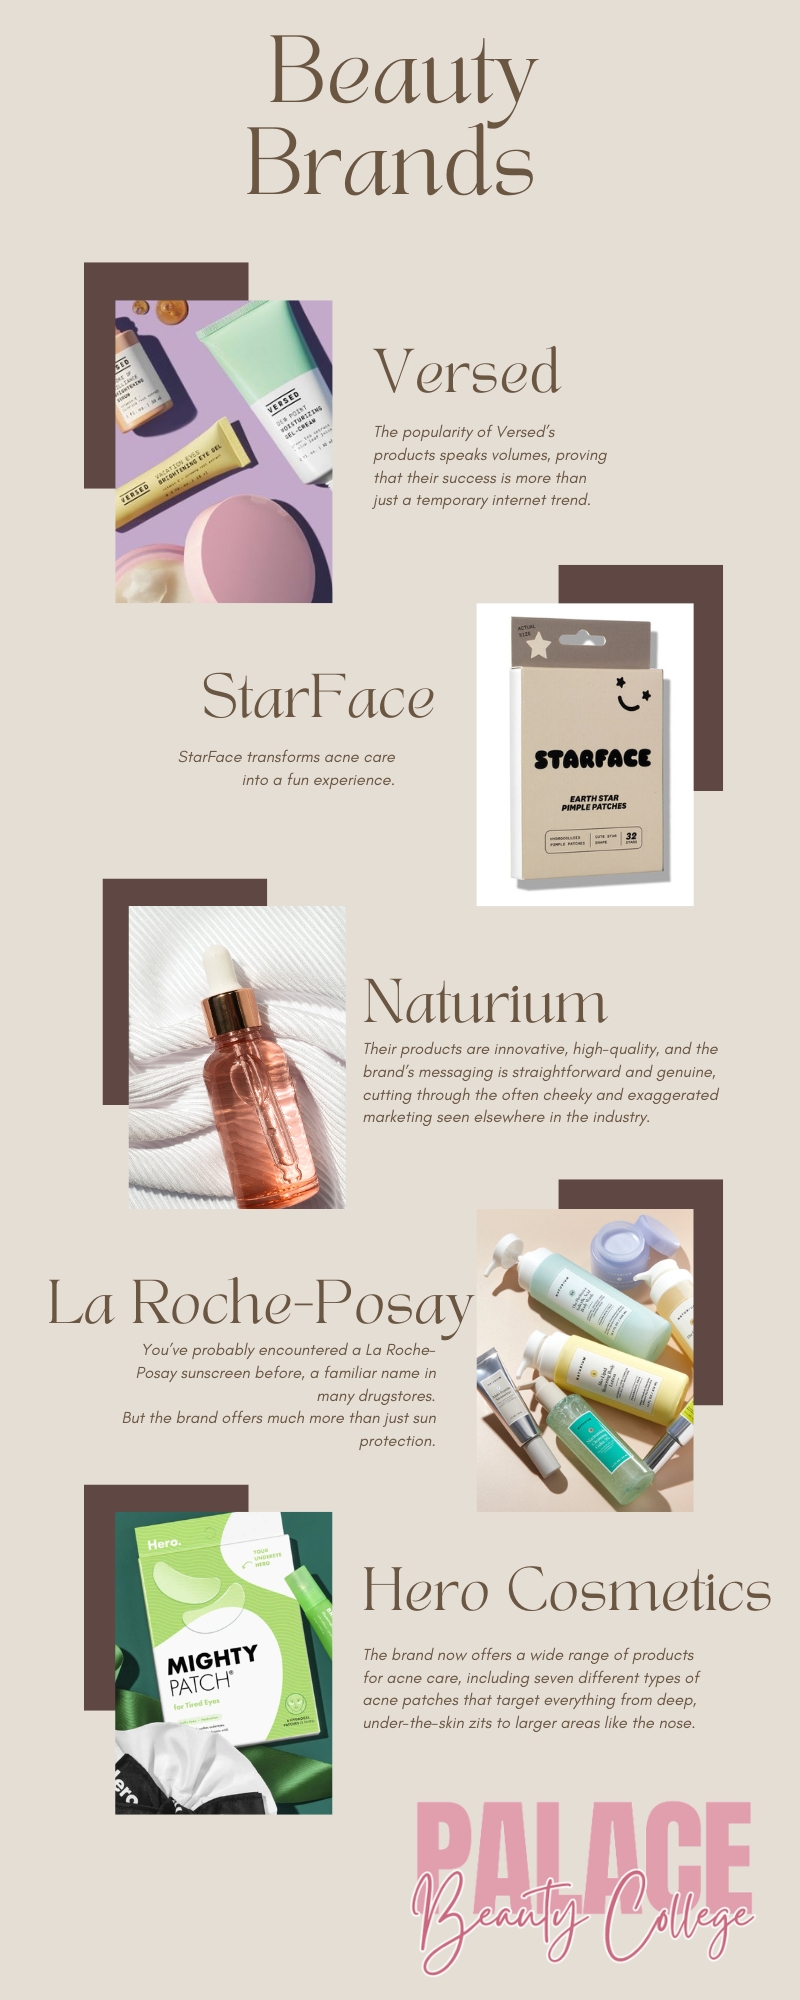 Beauty Brands infographic